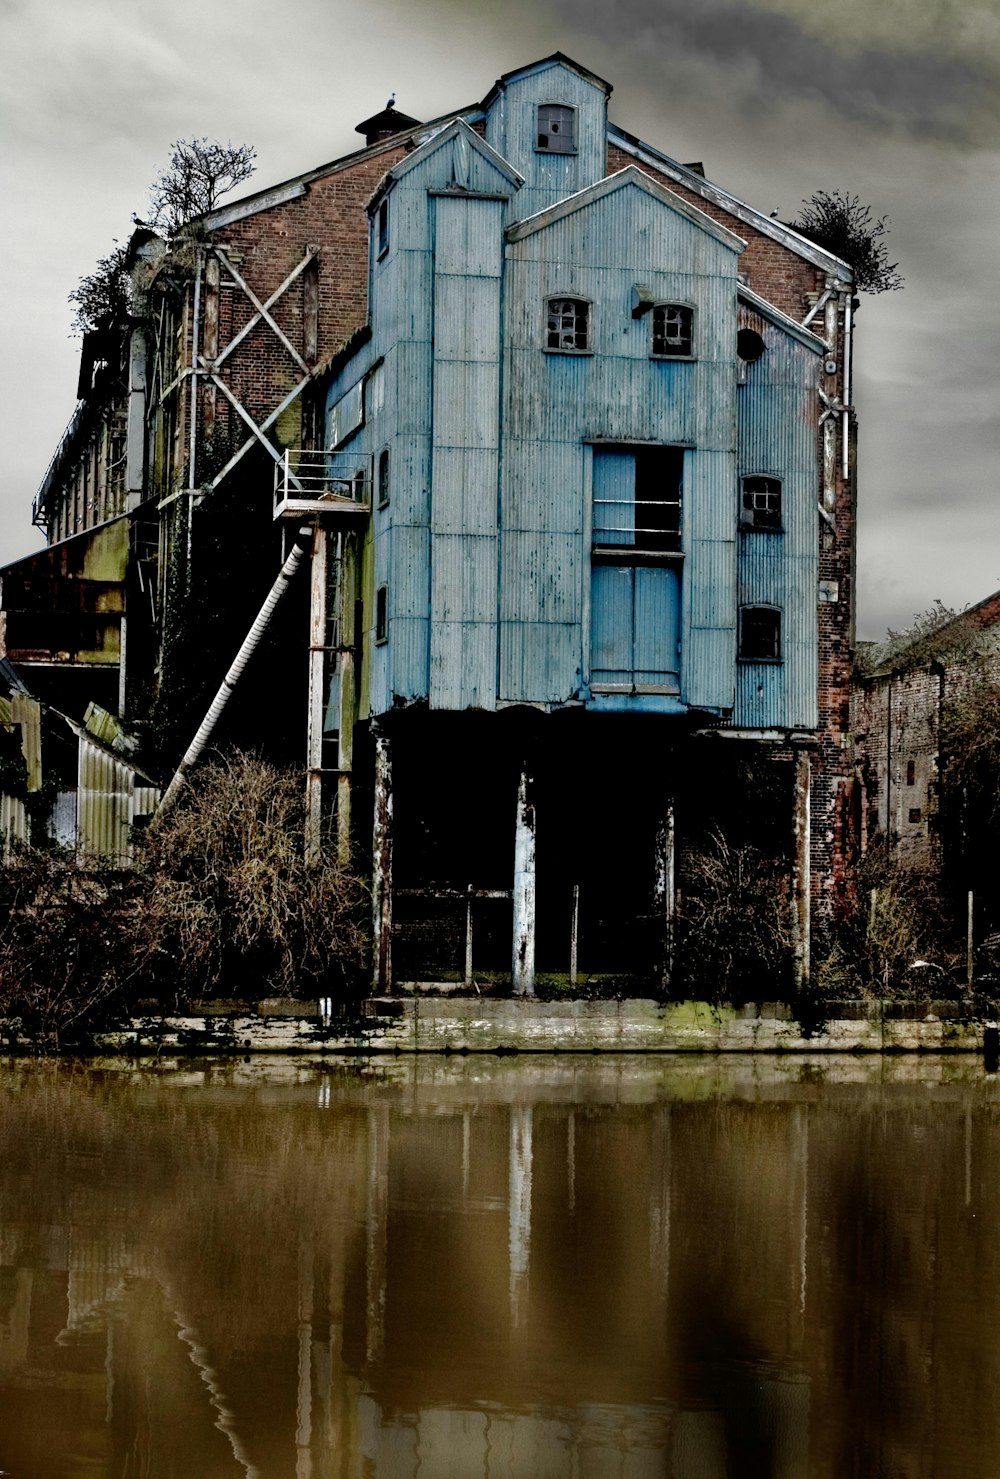 a large blue building sitting next to a body of water